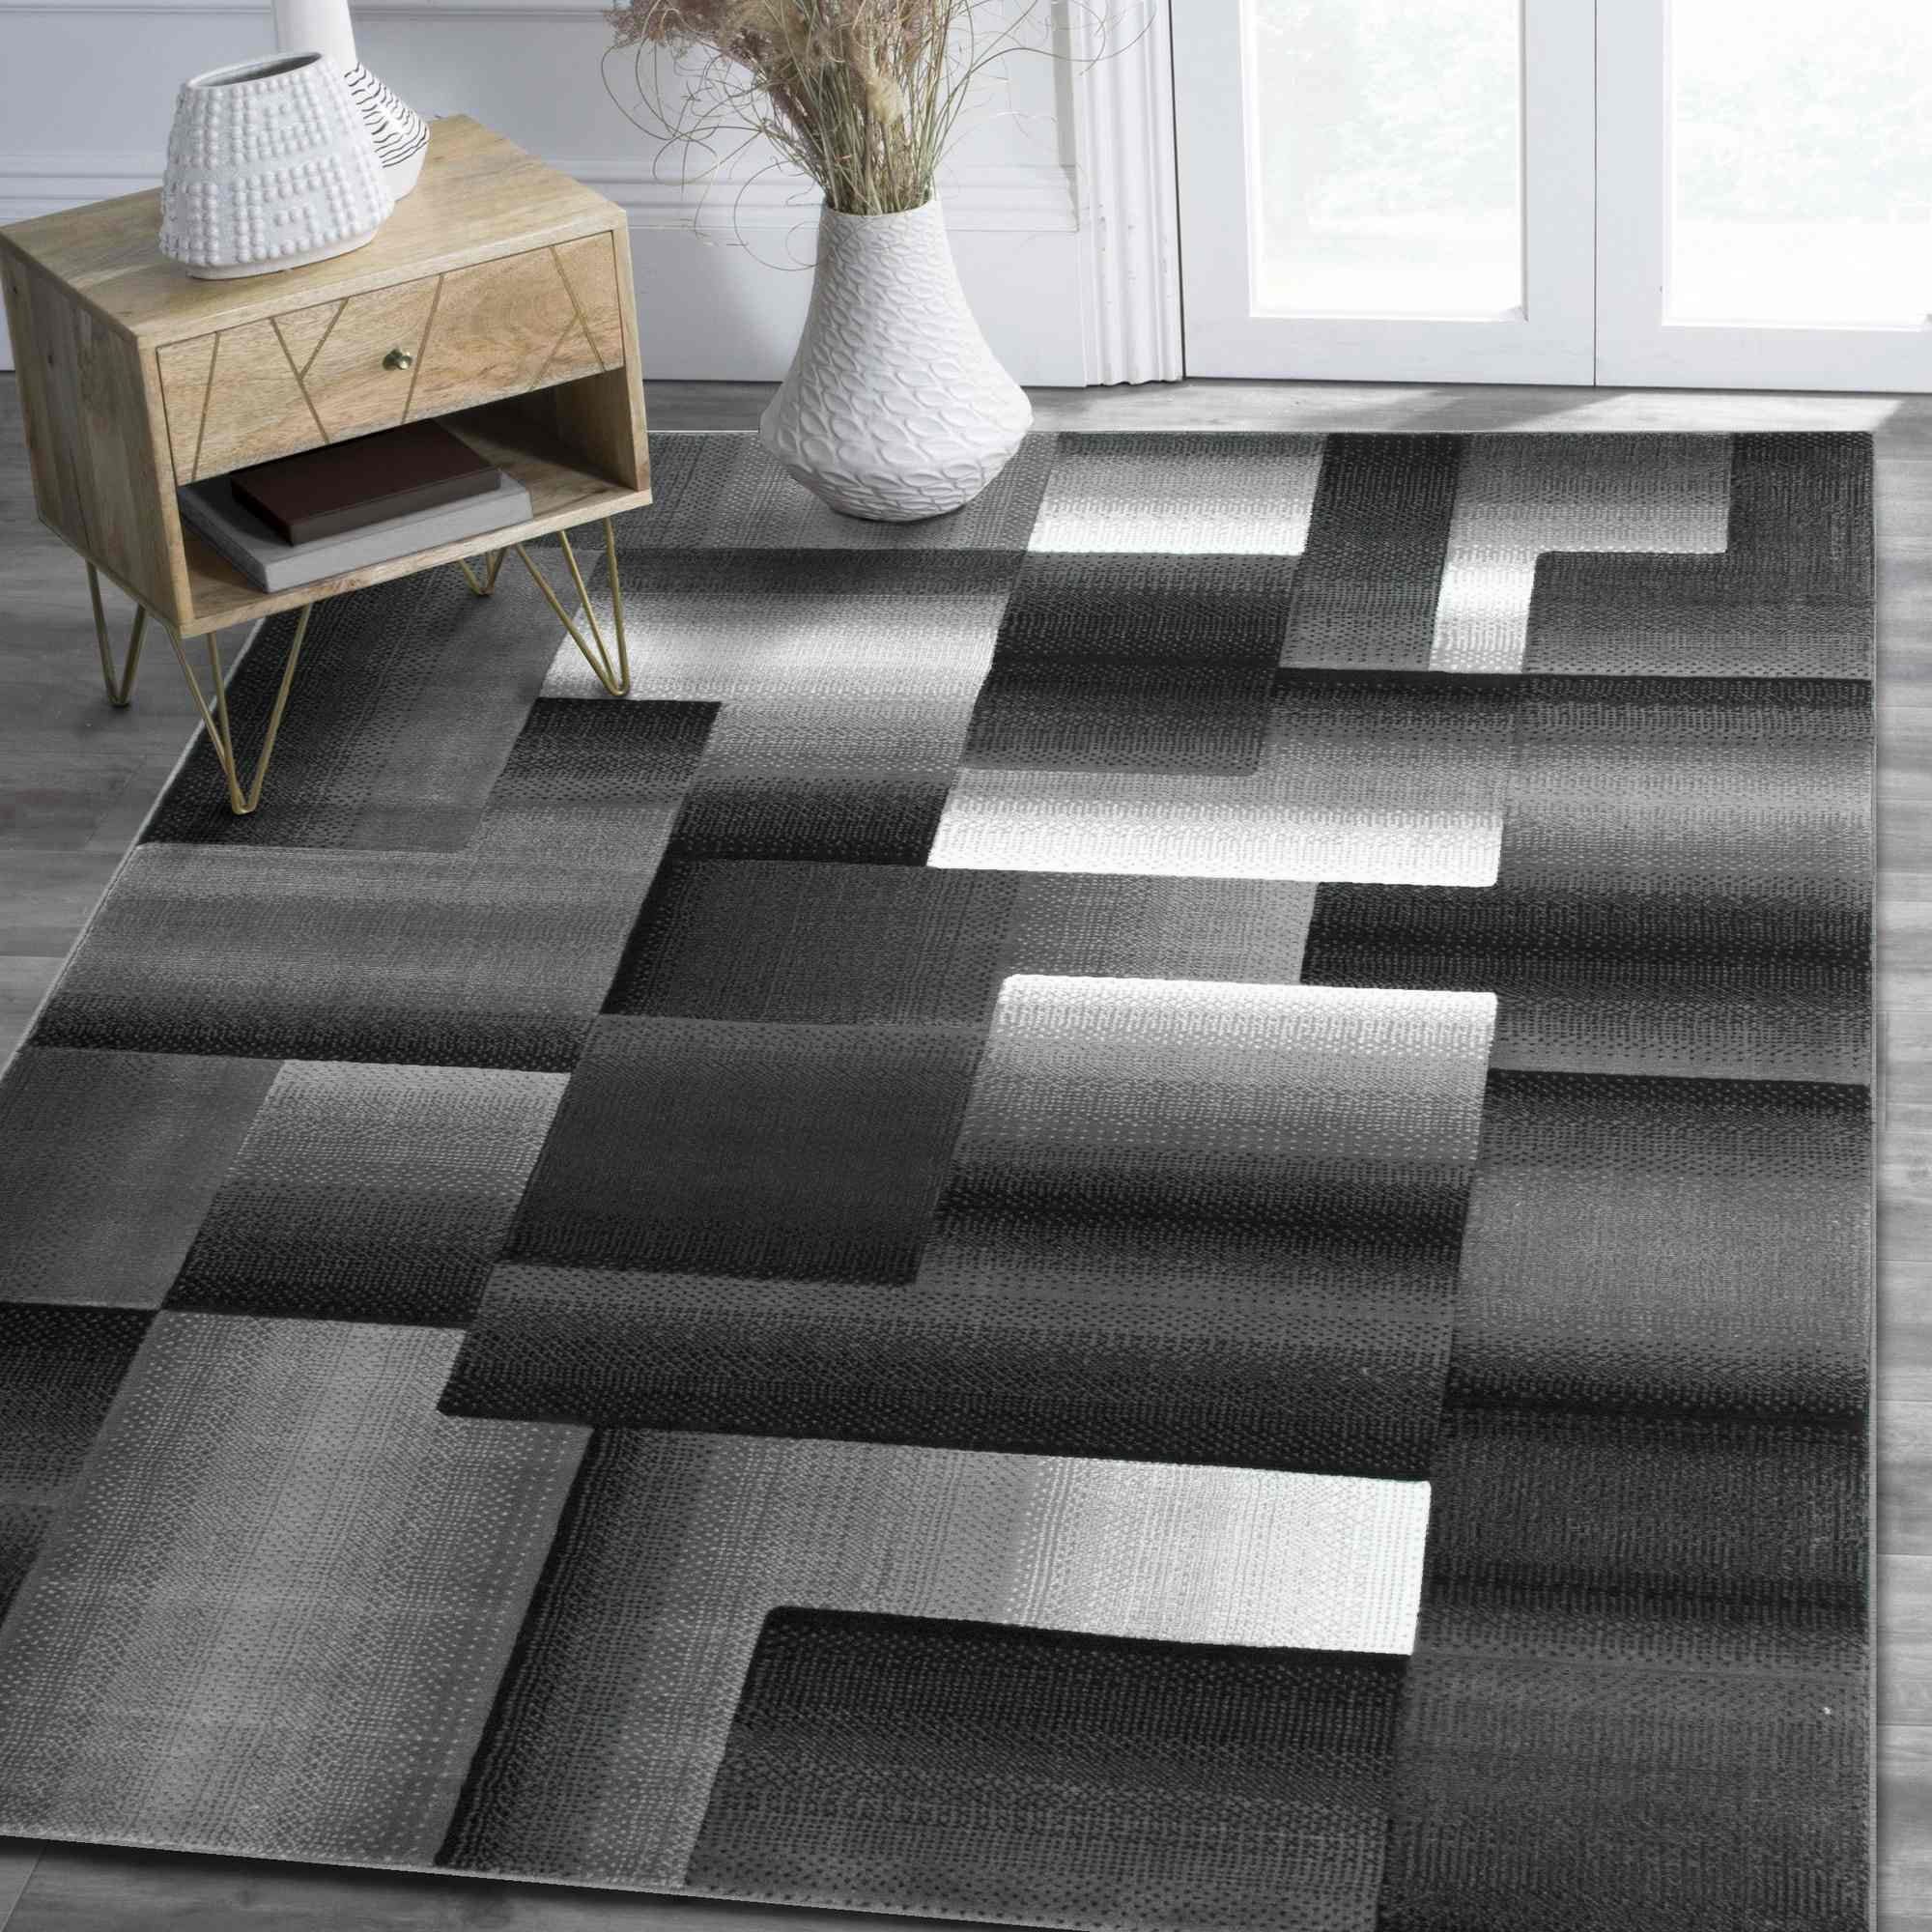 Grey/Silver/Black/Abstract Area Rug Modern Contemporary Geometric Cube And  Square Design Pattern Carpet – Walmart For Square Rugs (View 12 of 15)